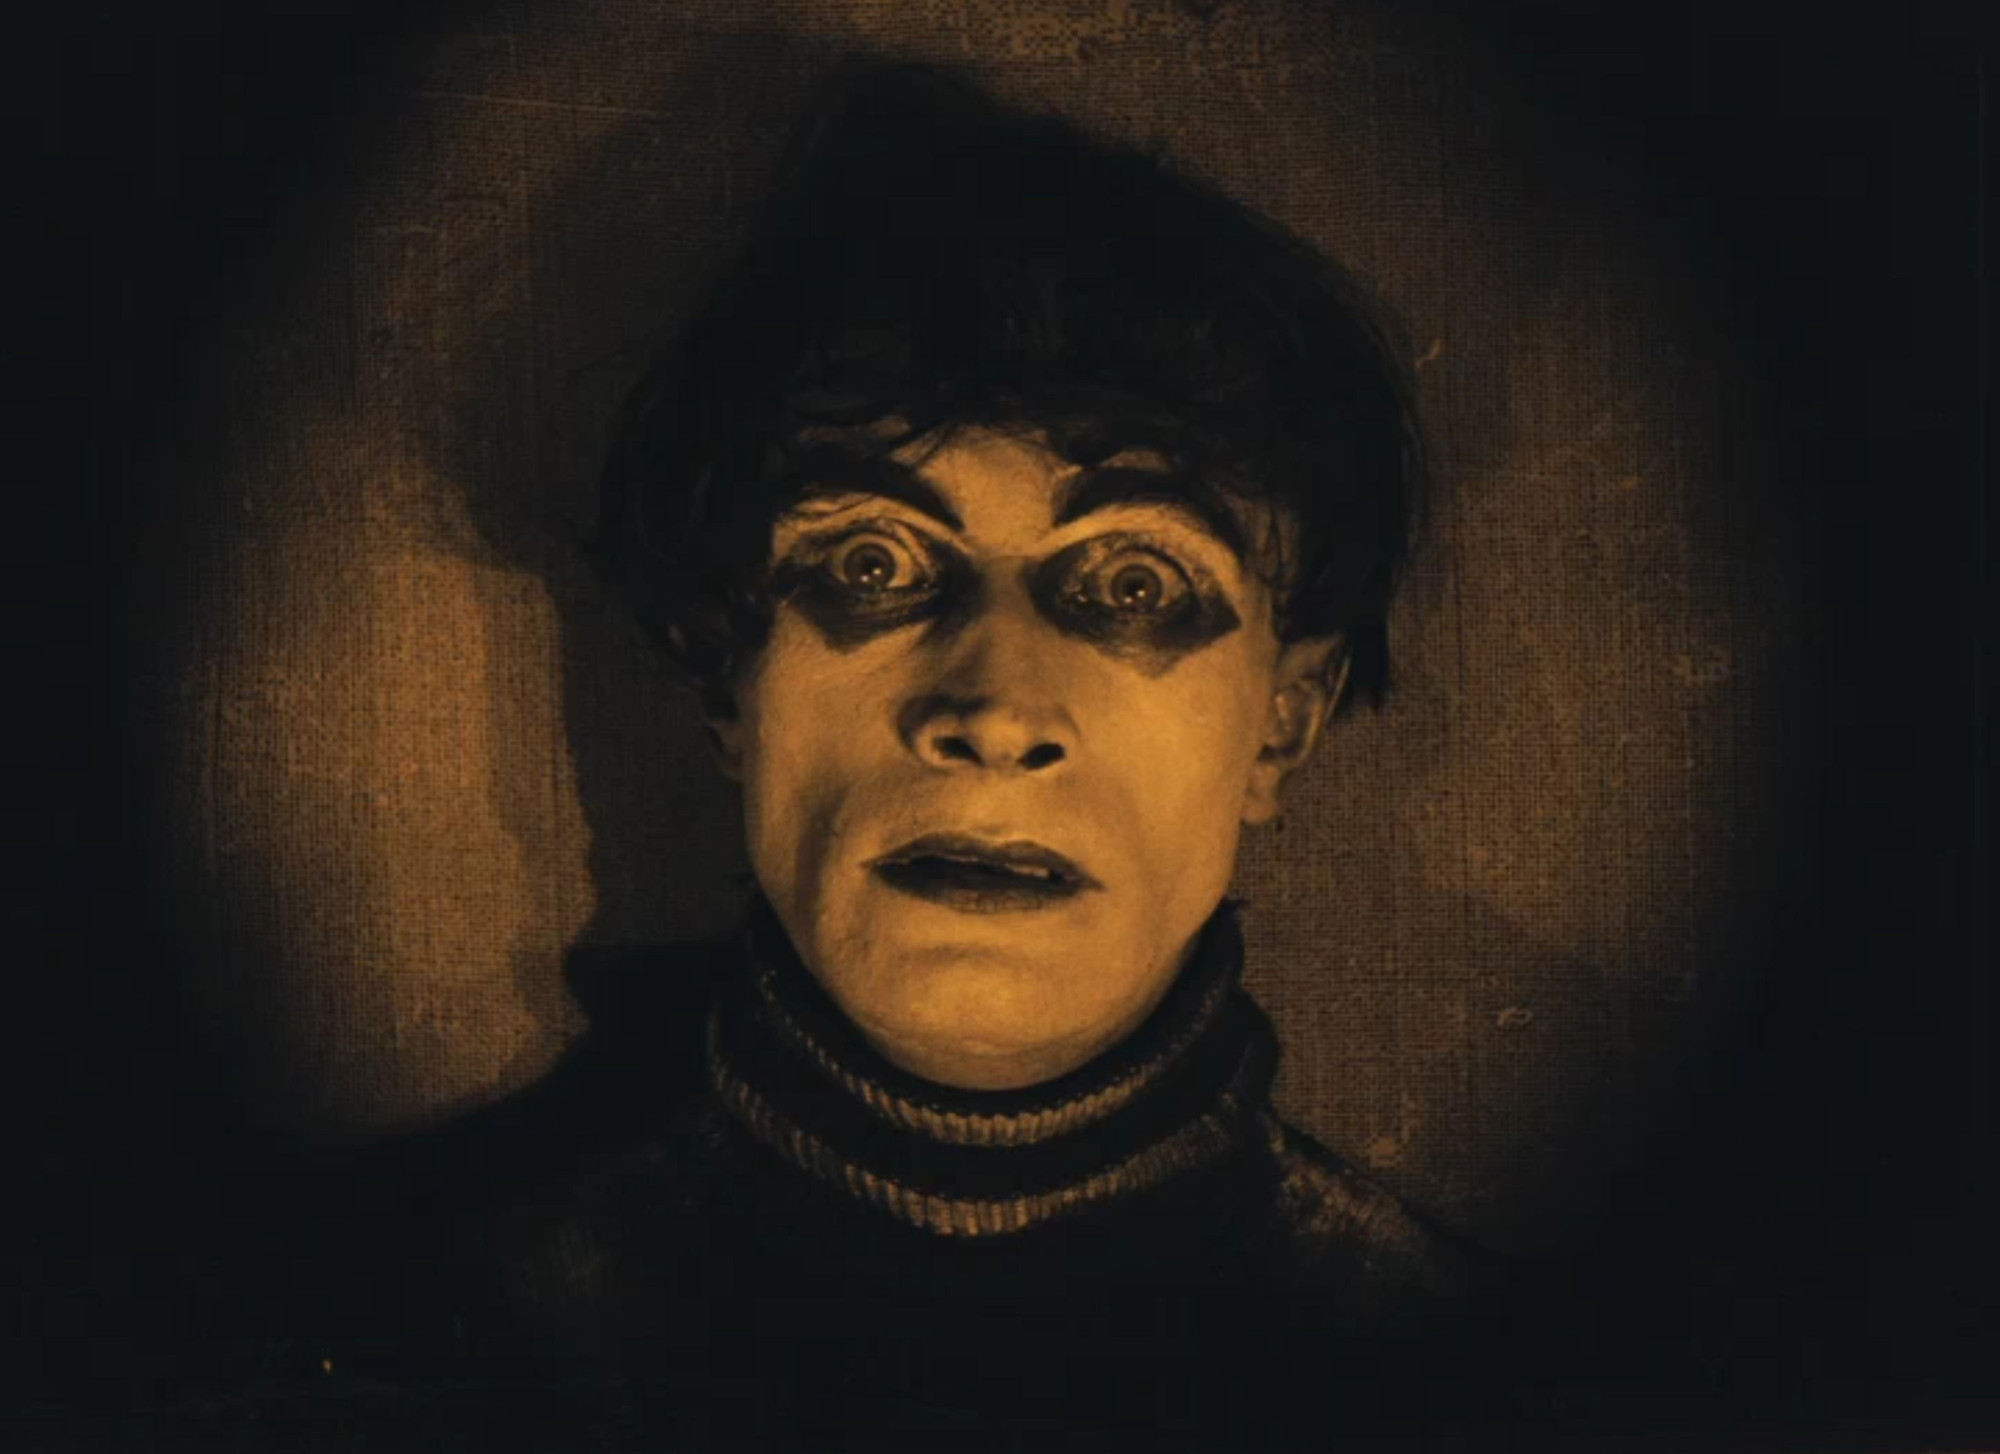 das-cabinet-des-dr-caligari-the-cabinet-of-dr-caligari-1920